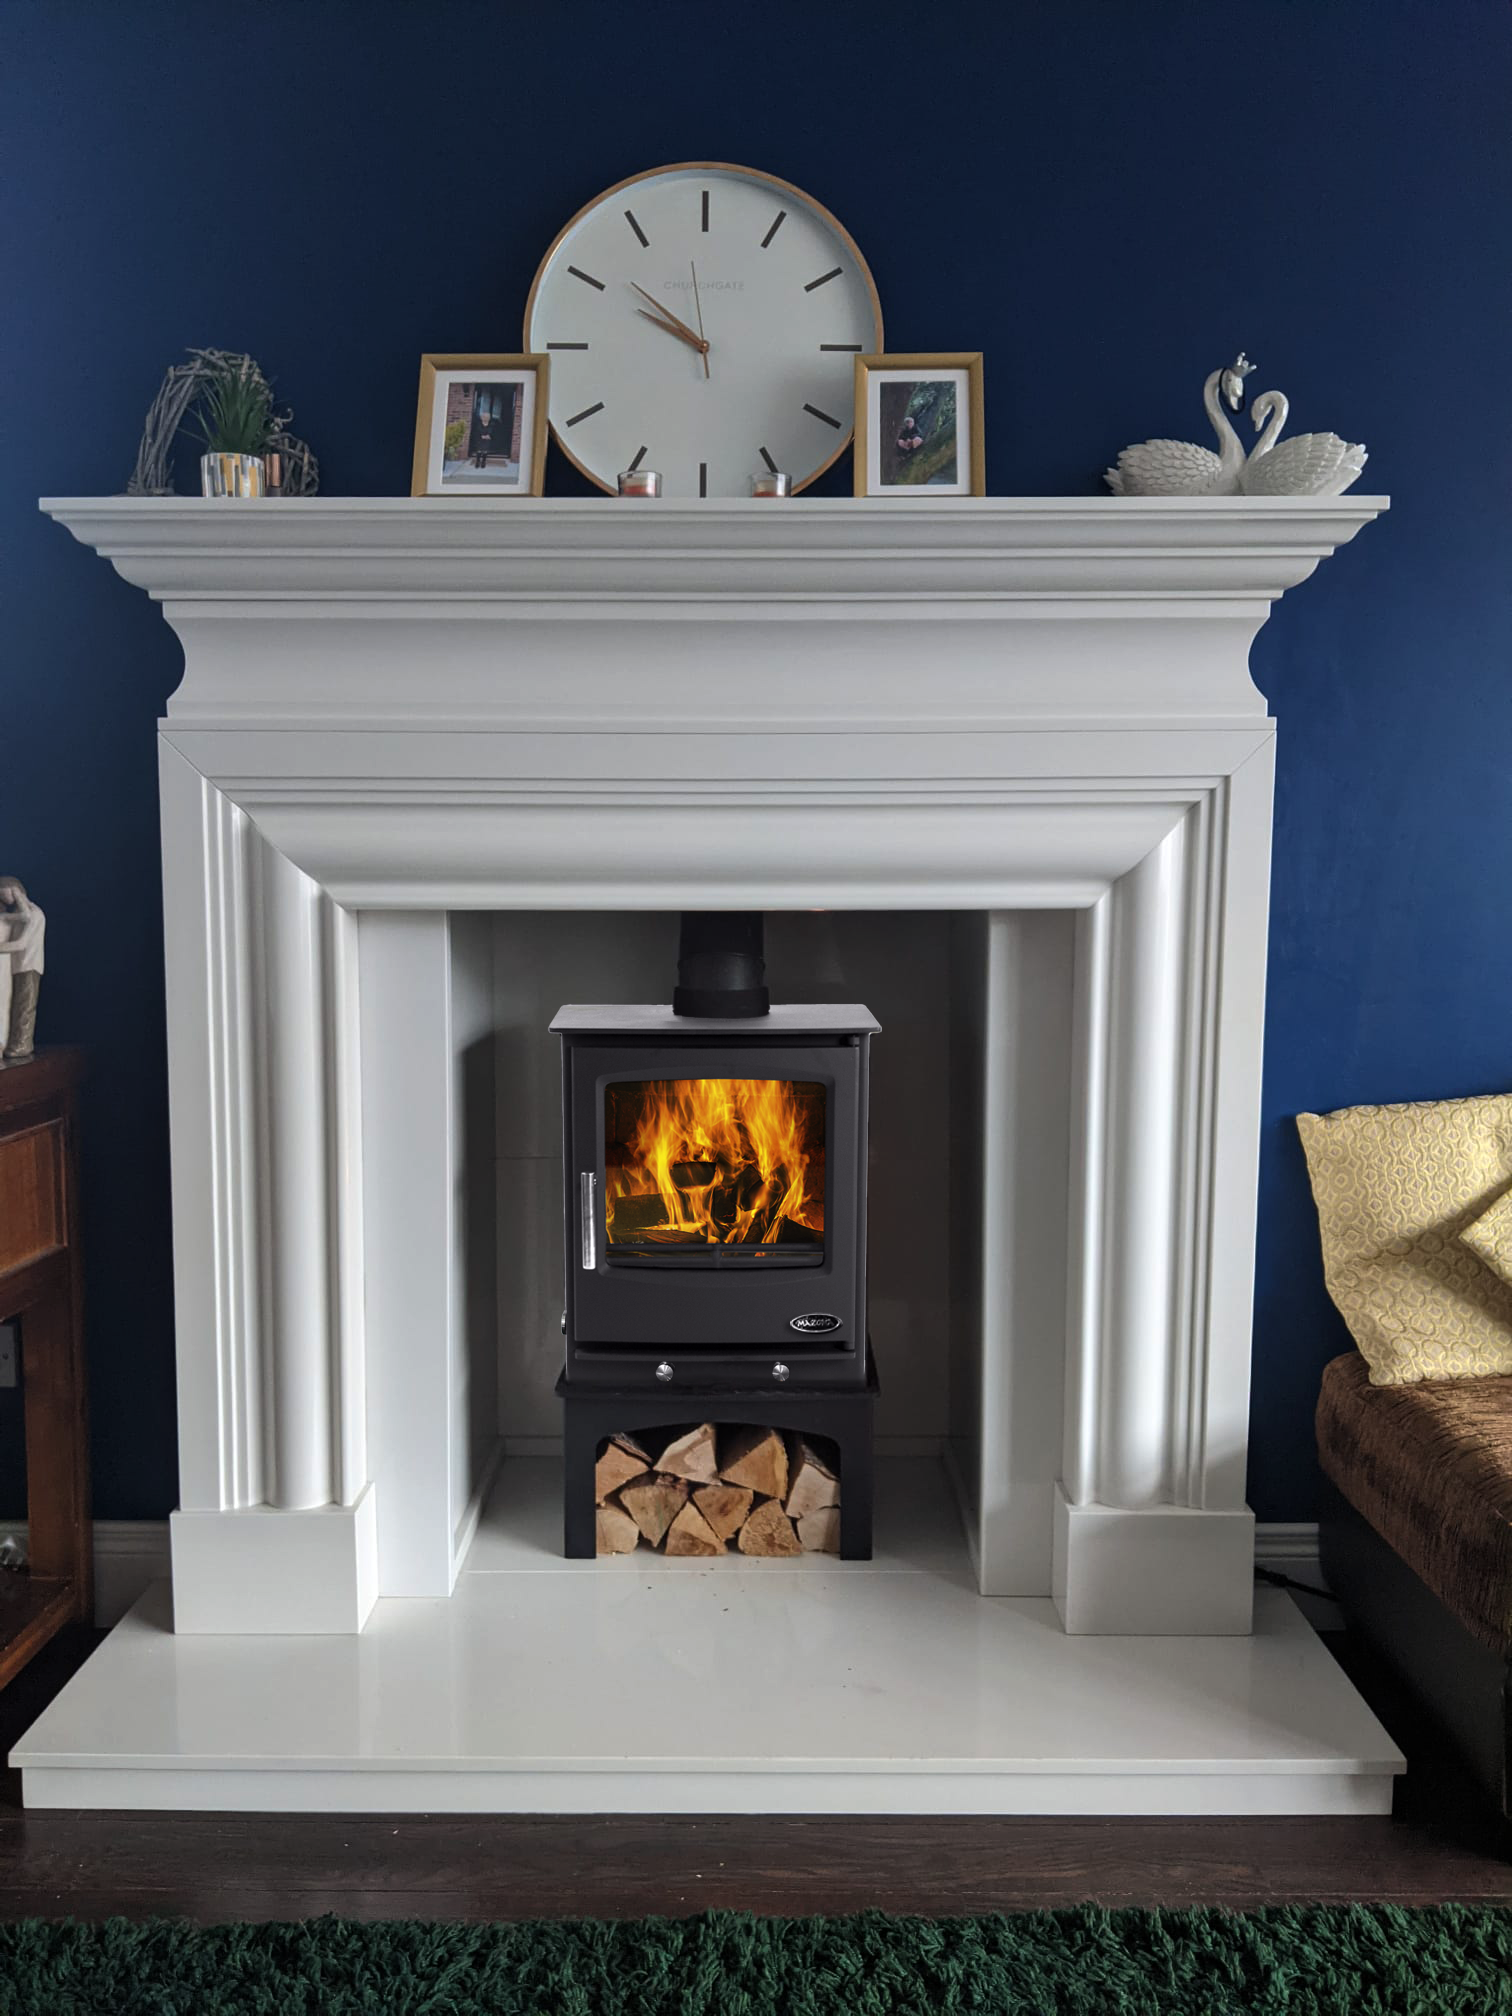 Building regulations Document J for the installation of wood burning and multi-fuel stoves